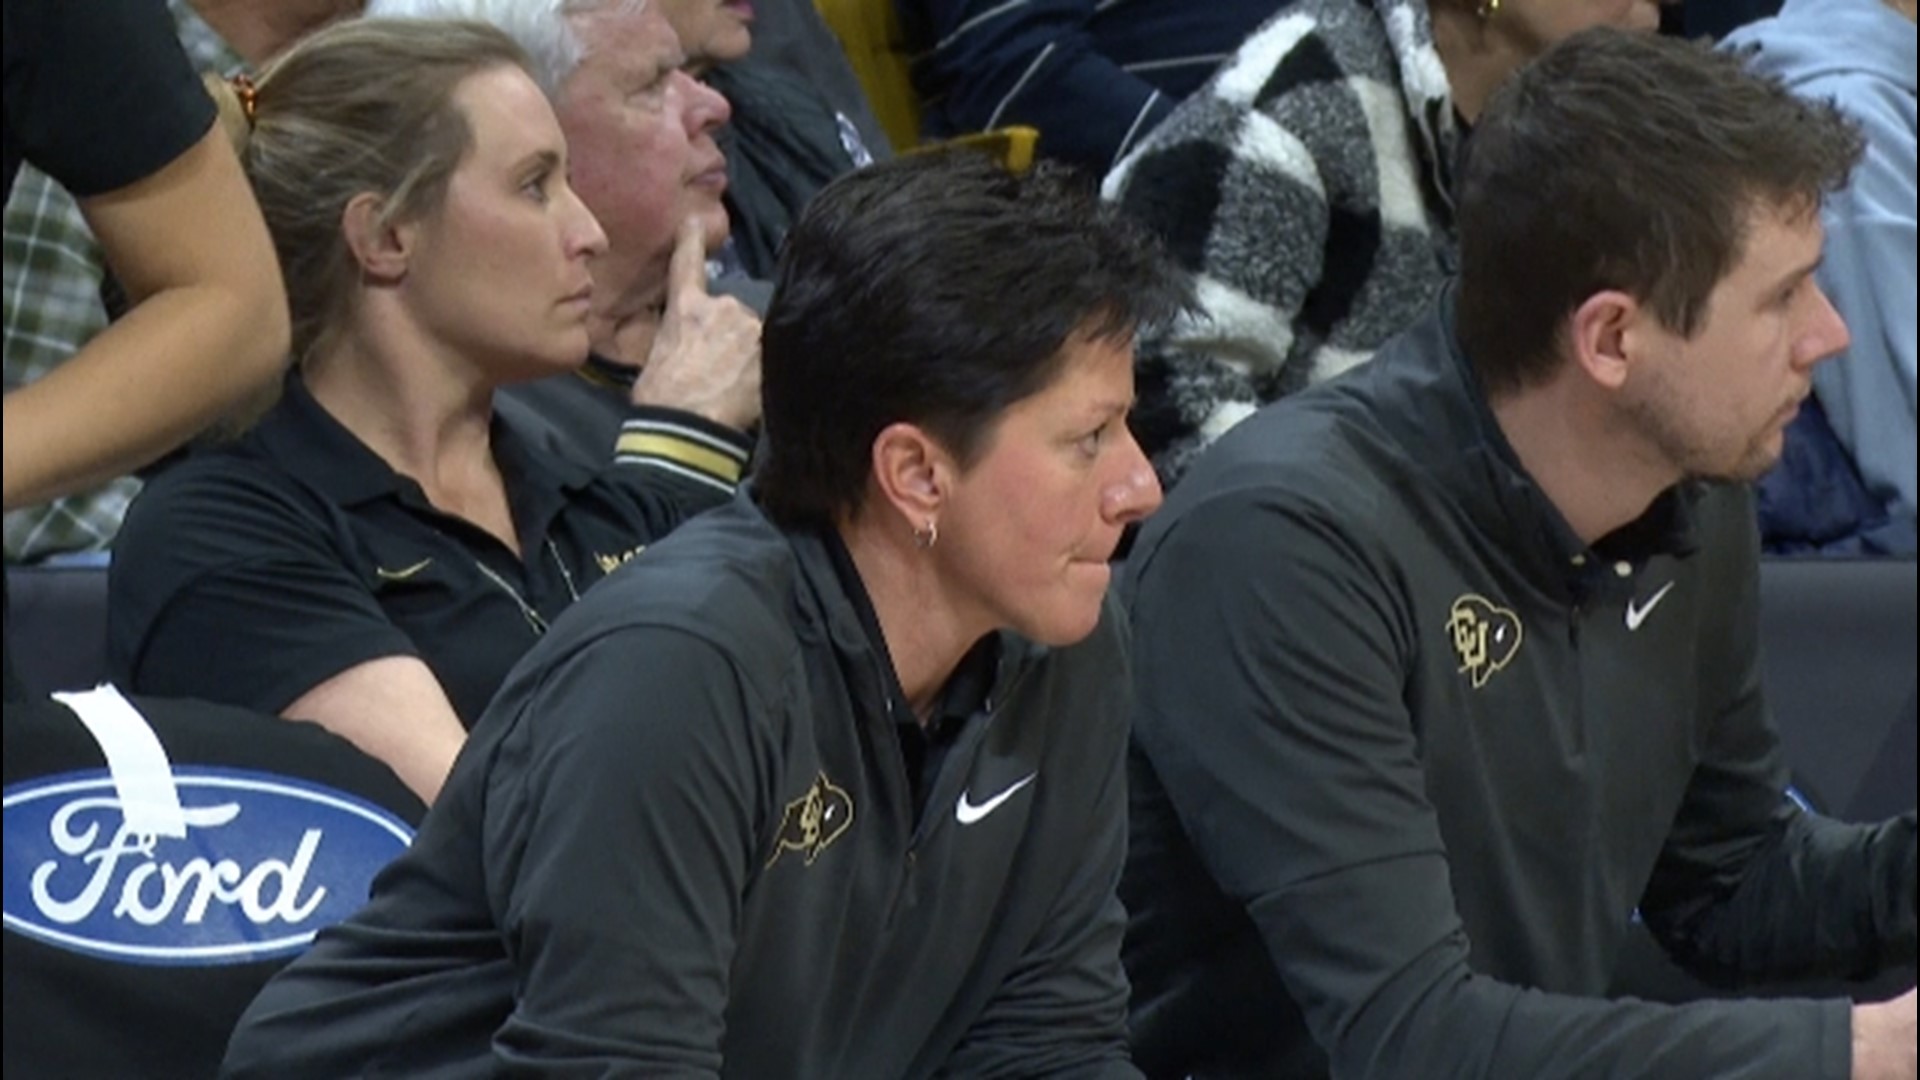 Shelley Sheetz, a 1995 All American player on the Colorado Buffaloes, brings perspective of playing in the Sweet Sixteen and Elite Eight in 1993.